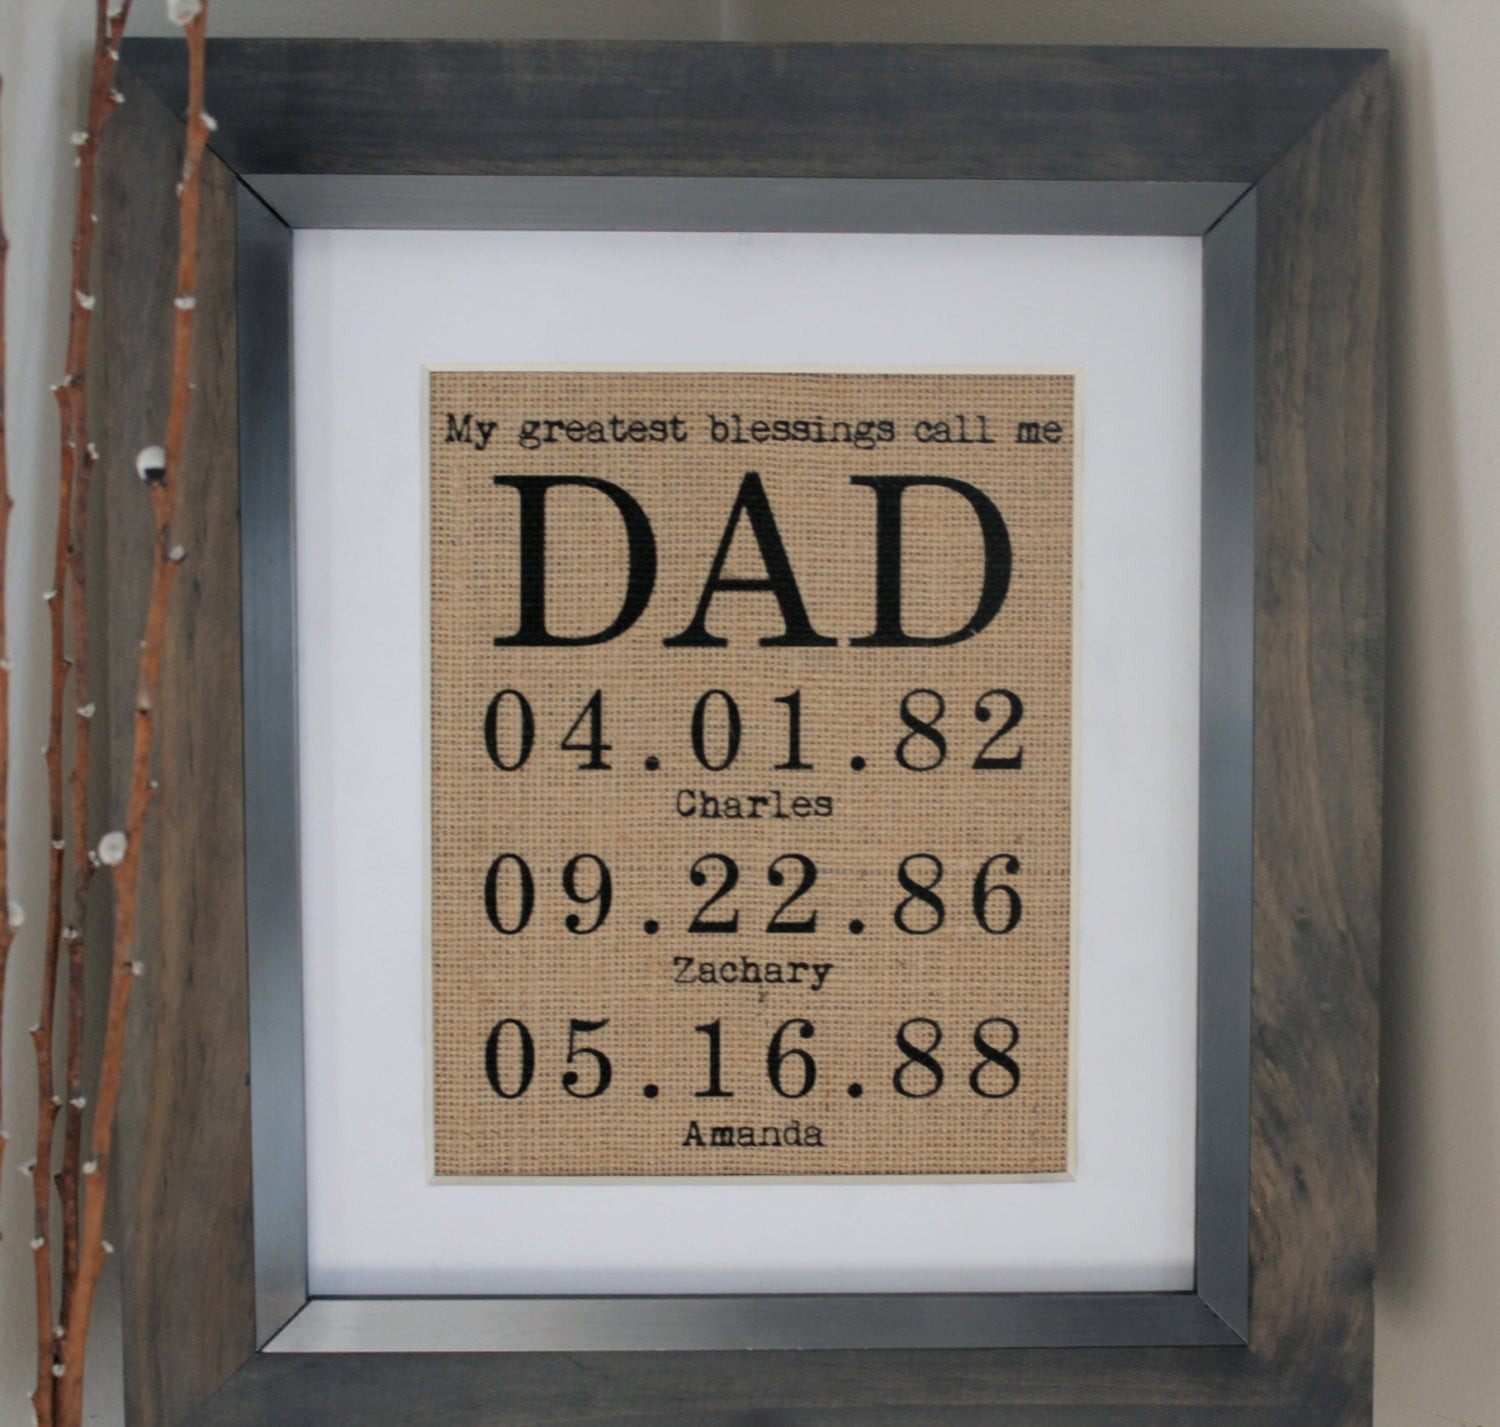 Personalized Fathers Day Gift
 Personalized Gift for DAD or MOM Fathers Day by EmmaAndTheBean